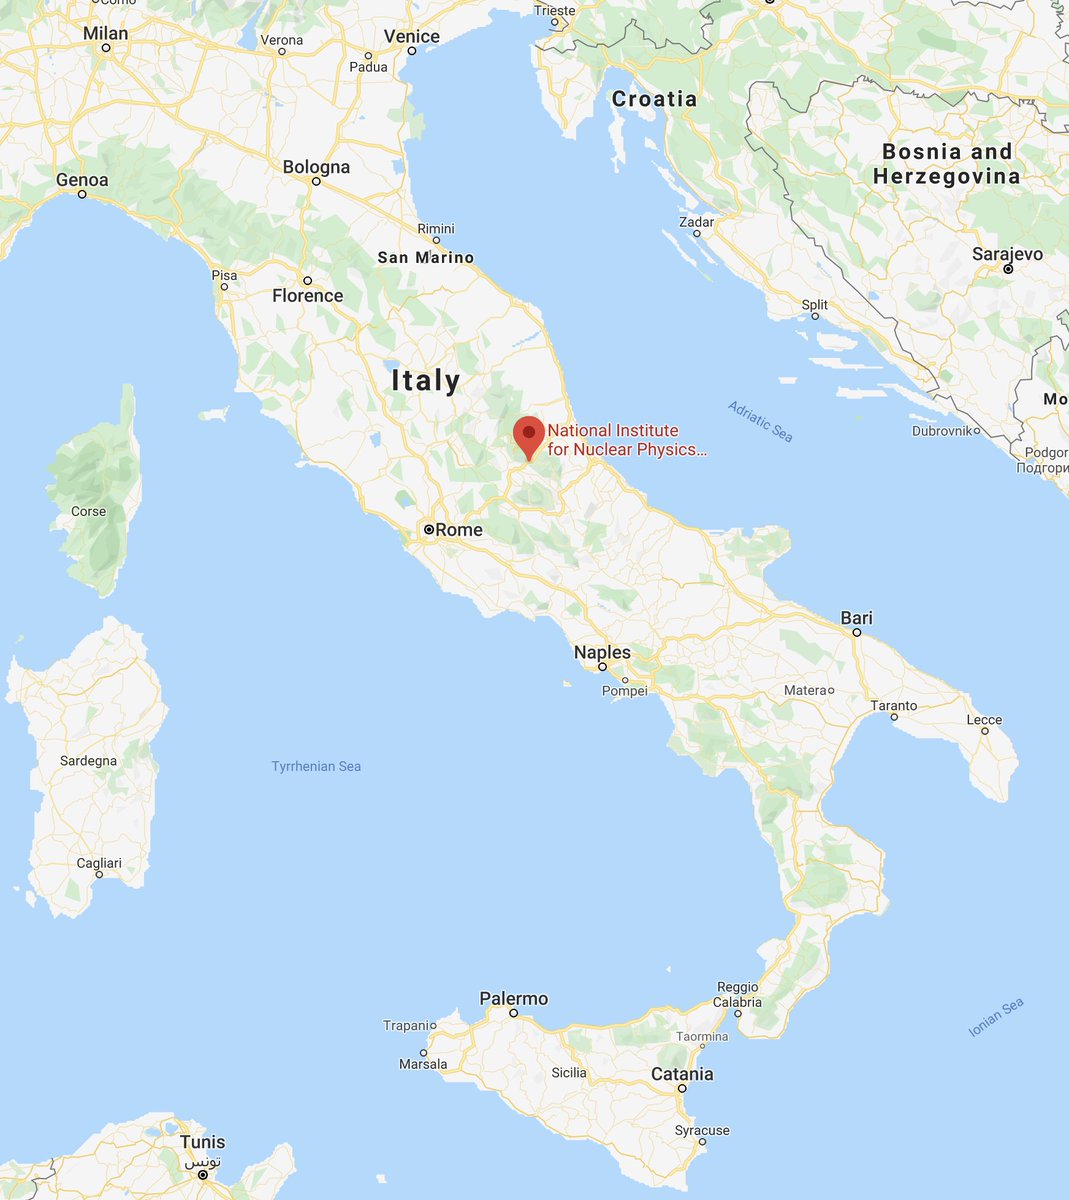 First things first: what is the Xenon experiment? it is an experiment in Italy using a big tank of extremely pure liquid Xenon, about 3 tonnes of it (the experiment is humbly called Xenon-1tonne). It's under a big mountain in a lab in a tunnel. Google how to get there, it's cool.